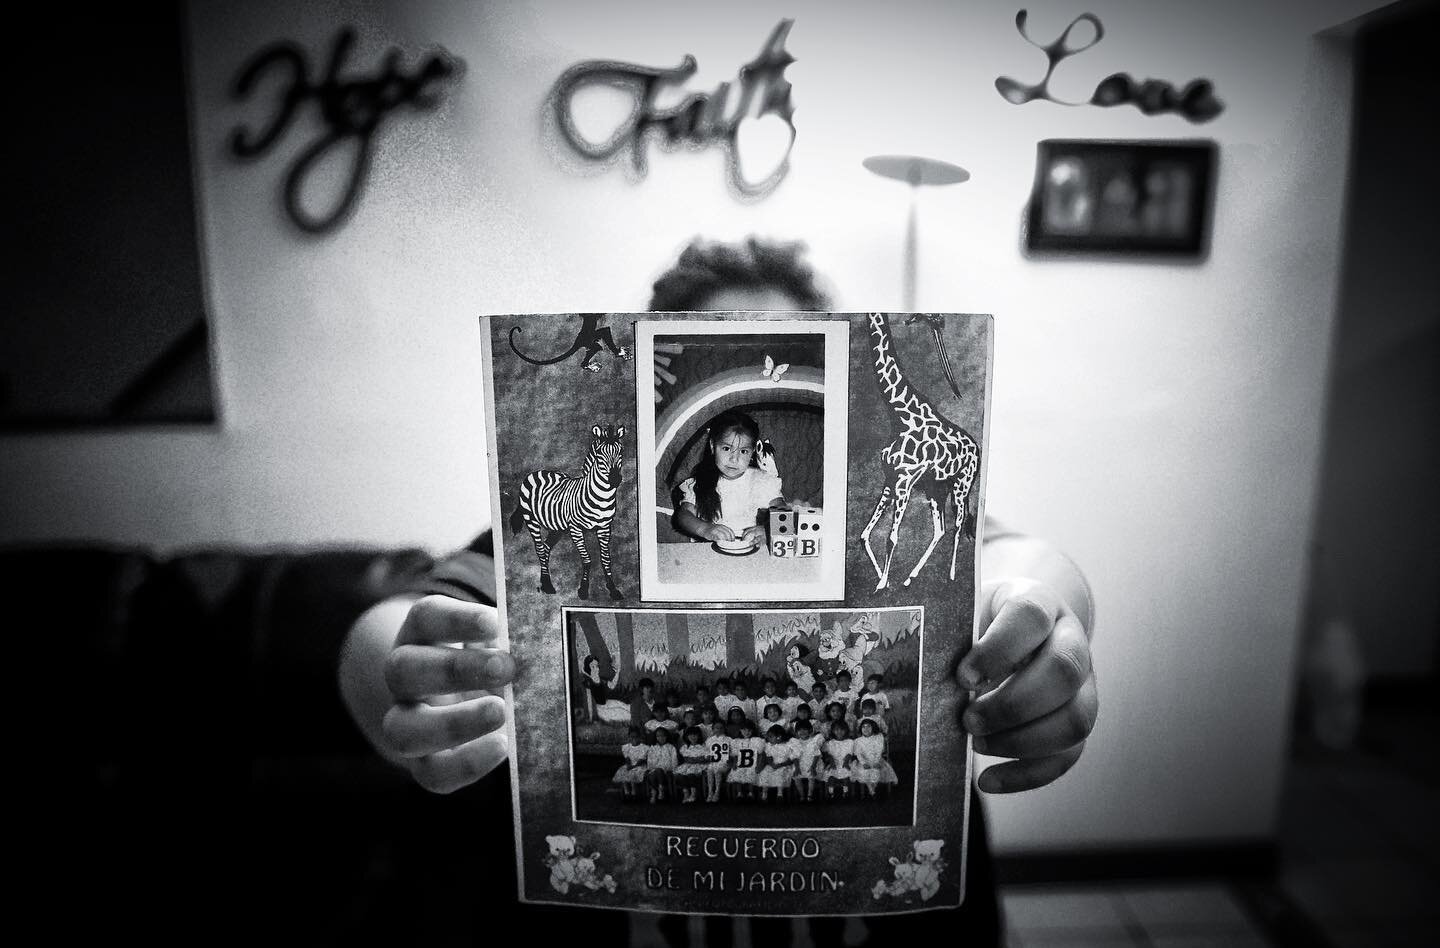 Jessica holds up an image of herself taken when she was in kindergarten back in Mexico, not long before she was brought to the United States by her mother. Jessica, now 29, has lived in the United States for just over 2 decades undocumented, after ar